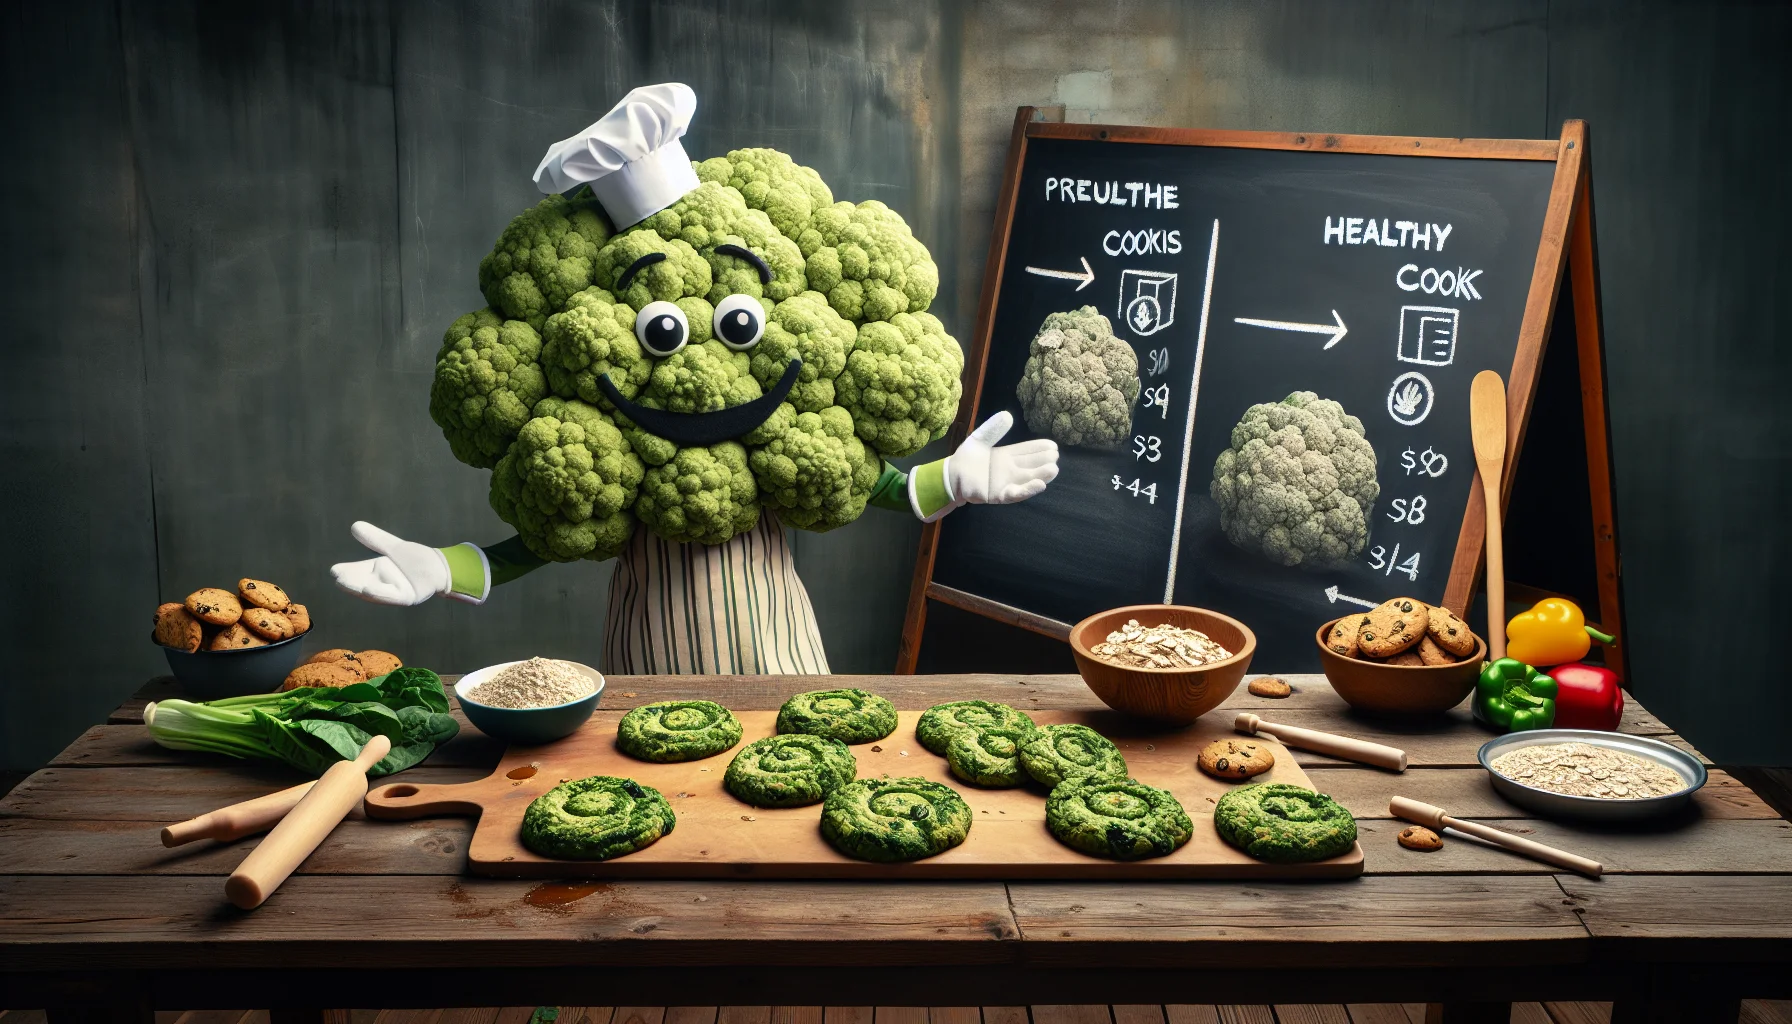 Imagine a whimsical scene of a family-friendly kitchen. There's a cauliflower mascot, with a chef hat, demonstrating how to bake perfect spiral green cookies made of spinach and oatmeal. The cookies are displayed on a rustic wooden table. Visible in the background, there is a big chalkboard with a chalk illustration showing the comparison of prices between these healthy cookies and regular cookies. The ambiance exudes warmth and grins, evoking feelings of fun and humor while promoting the benefits of eating healthy on a budget.